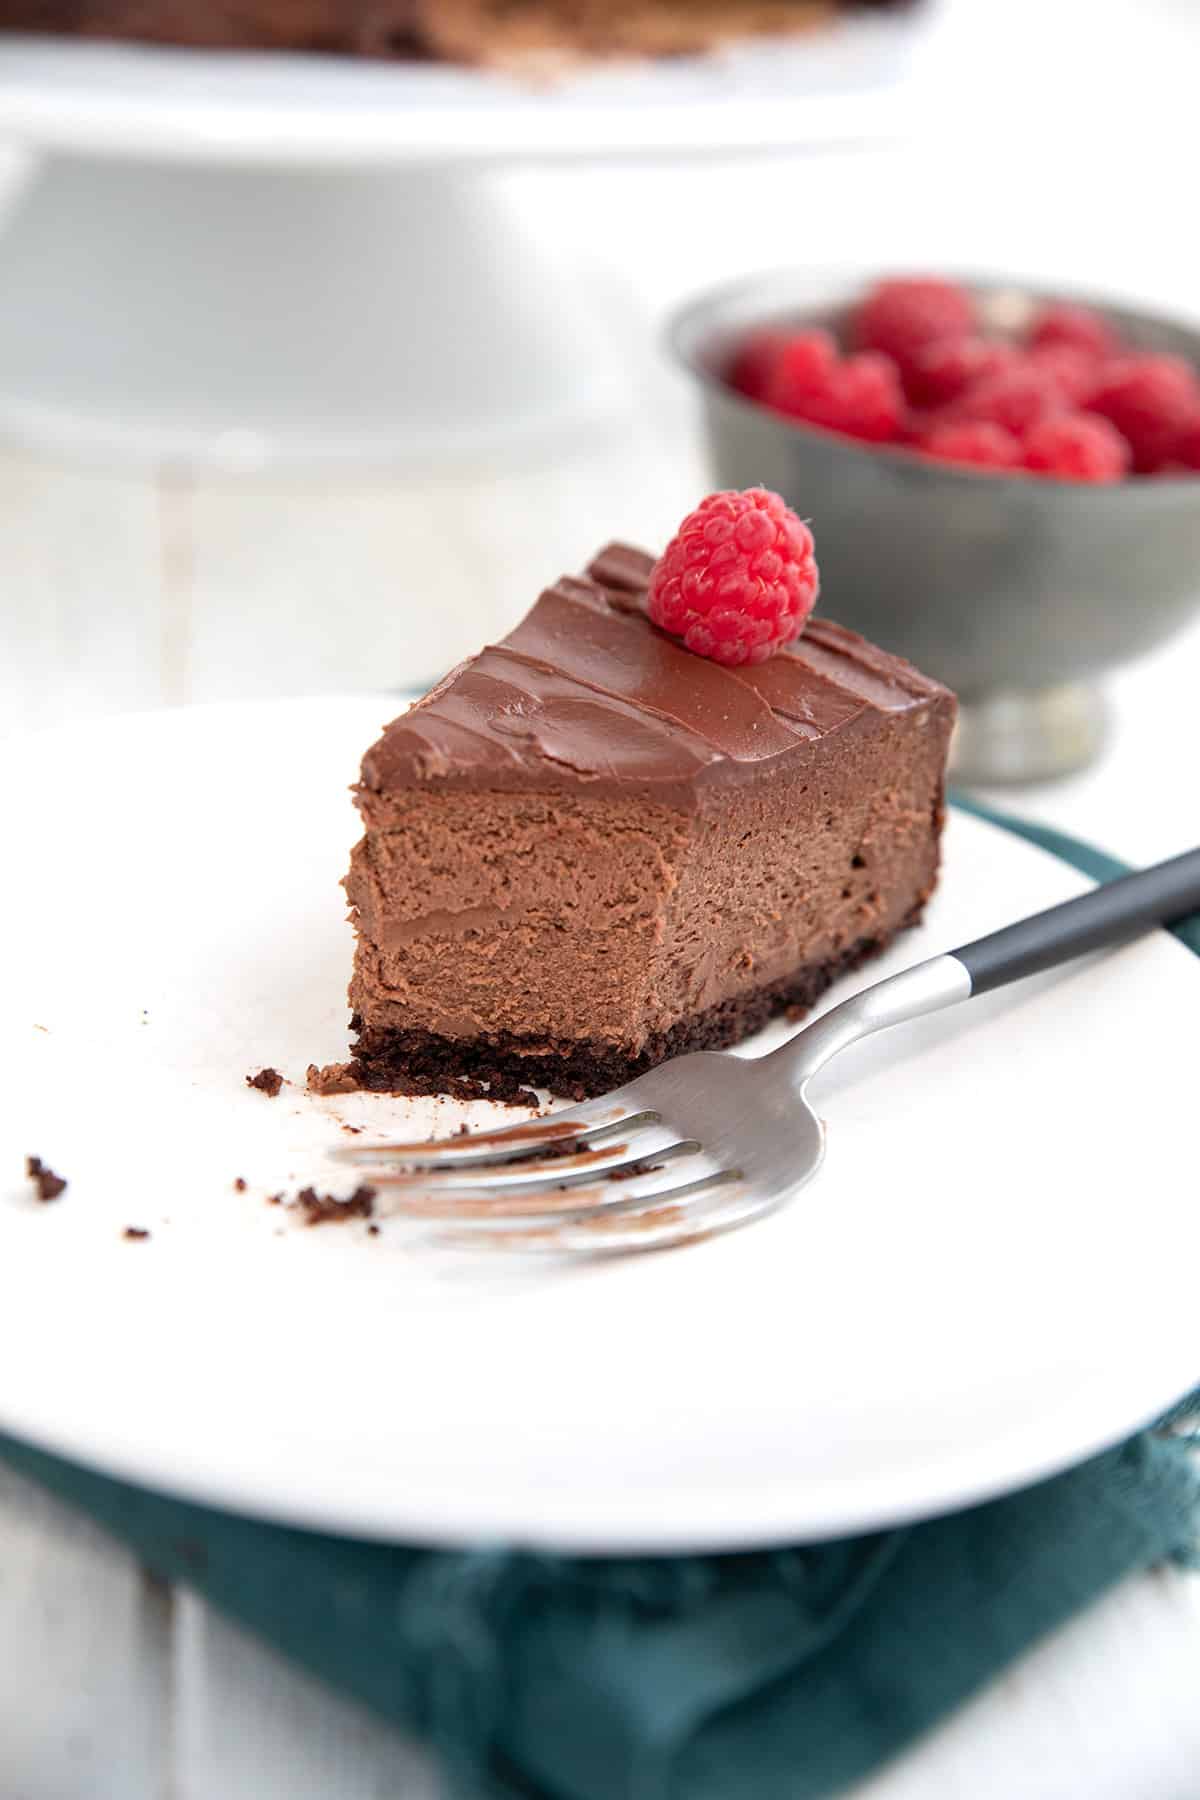 A slice of Keto Chocolate Cheesecake on a white plate with several bites taken out of it.